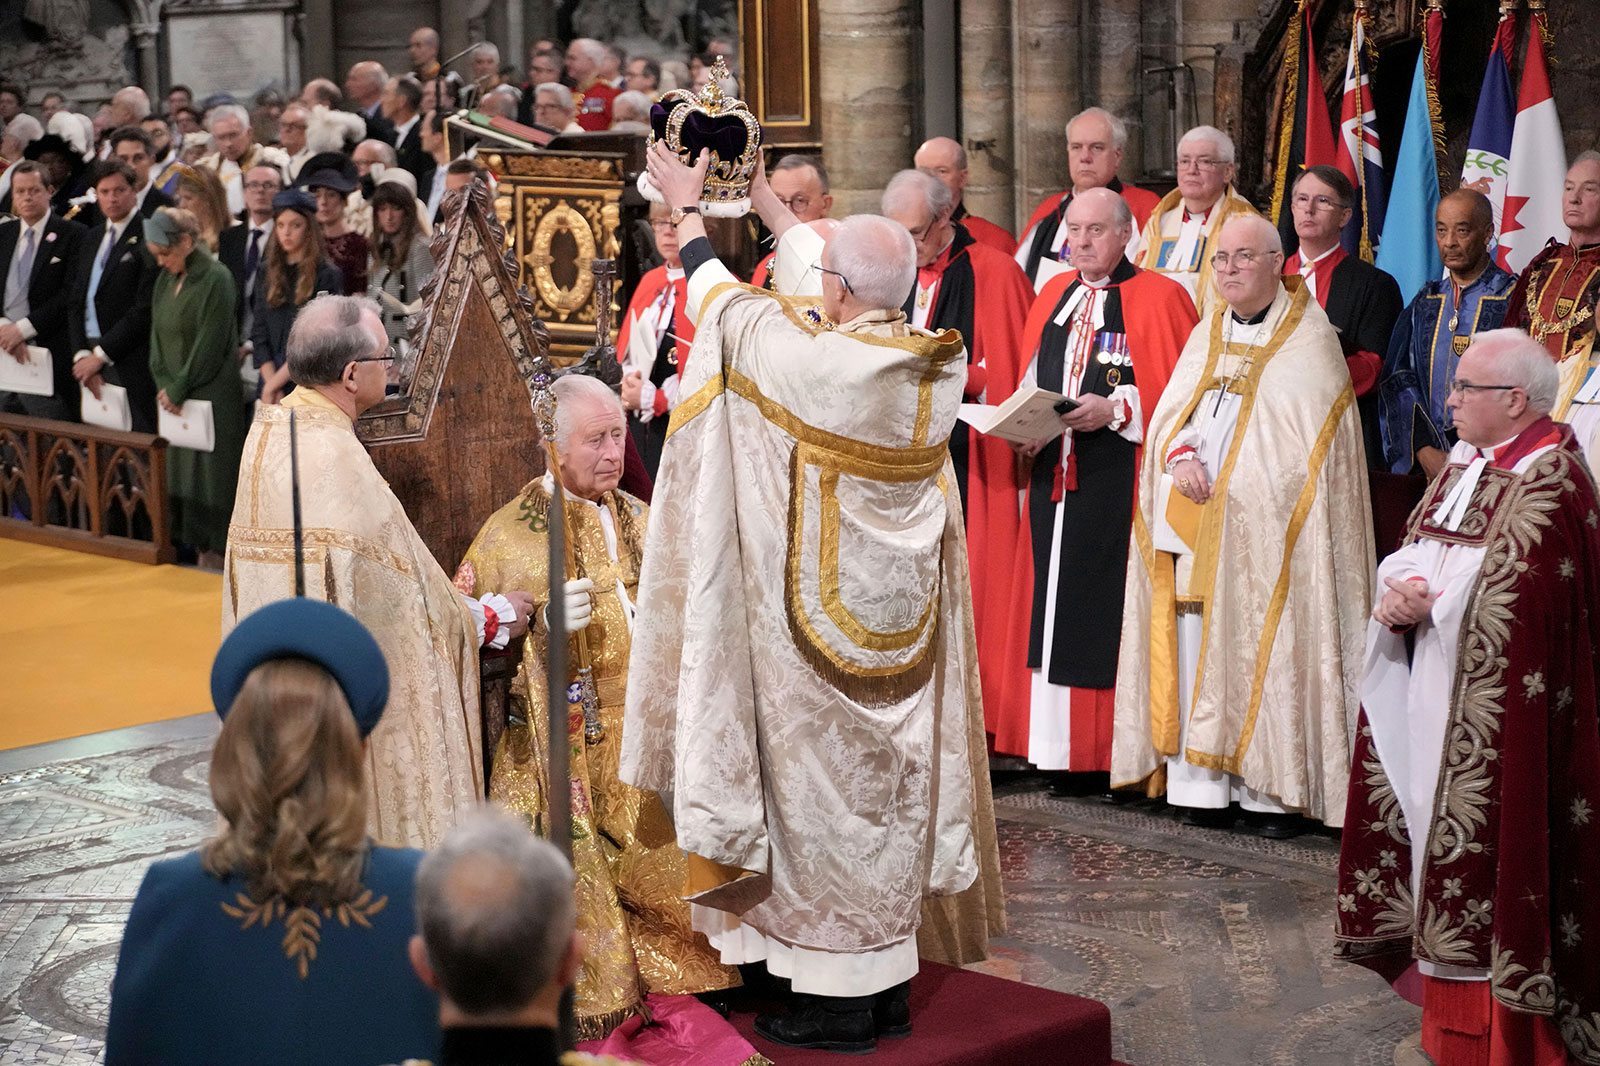 The Archbishop of Canterbury Justin Welby places St. Edward's Crown upon Charles III's head on Saturday.